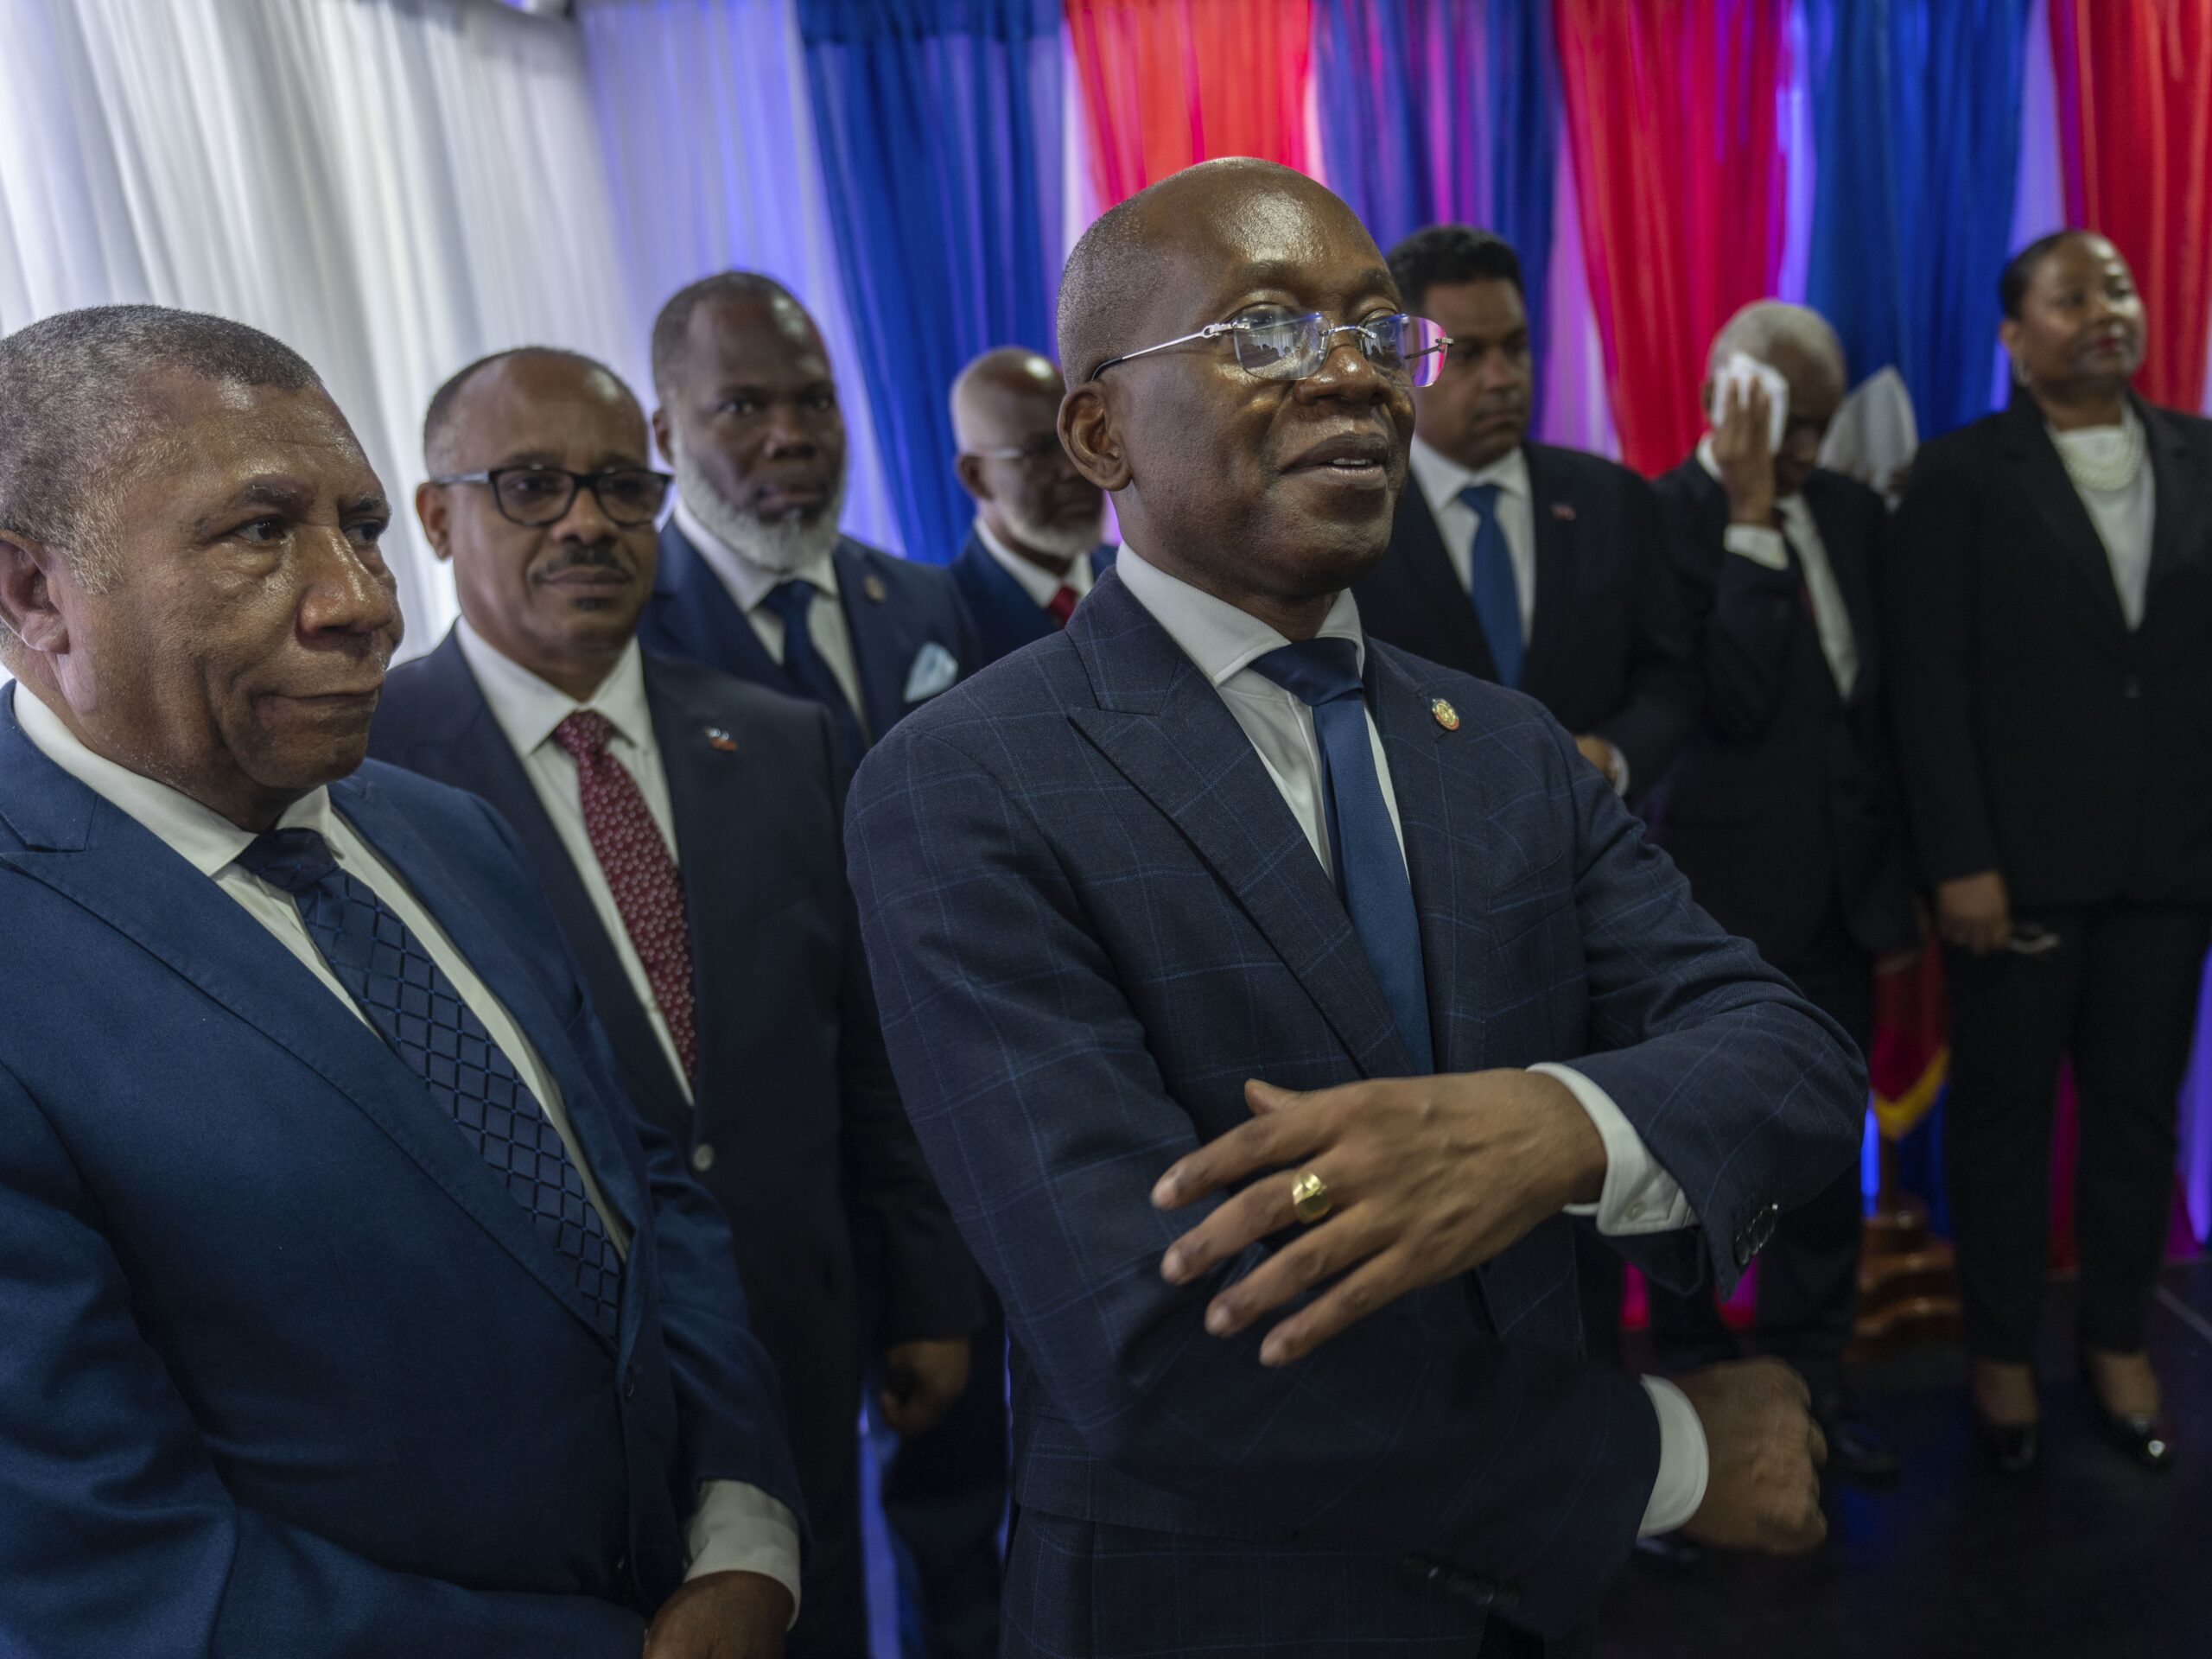 Michel Patrick Boisvert (center), who was named interim prime minister by outgoing Prime Minister Ariel Henry, attends the swearing-in ceremony of the transitional council tasked with selecting Haiti's new prime minister and cabinet, in Port-au-Prince, Haiti.